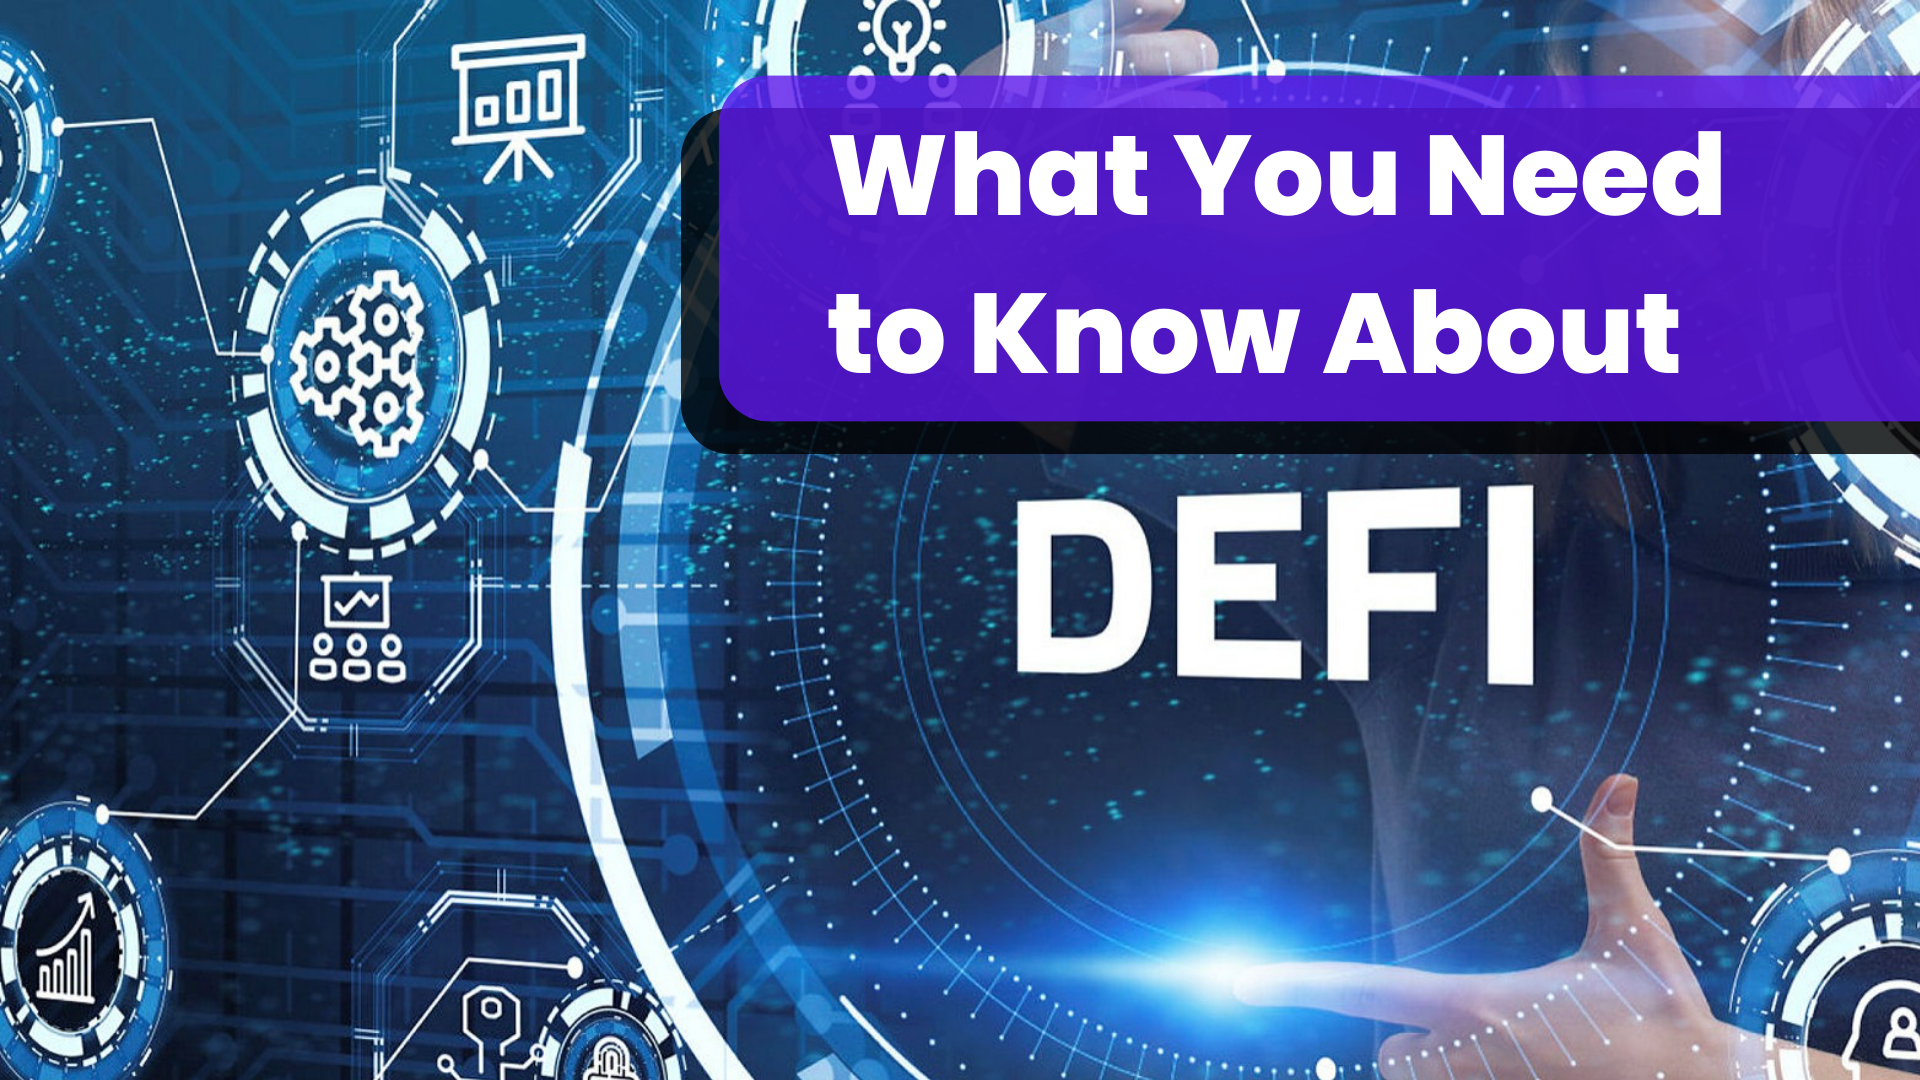 What You Need to Know About DeFi